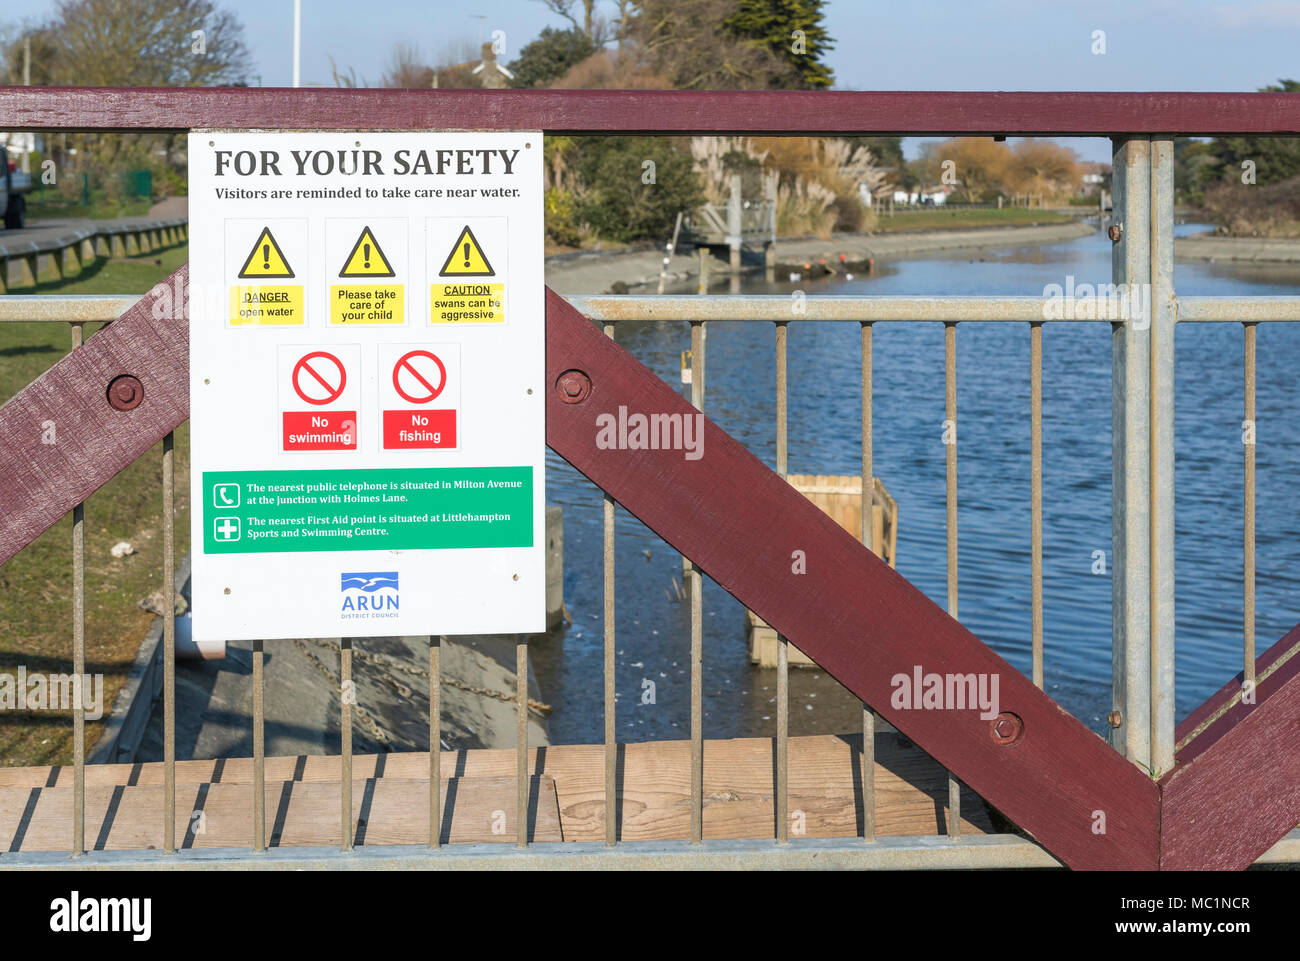 For your safety warning sign by a lake in the UK. Stock Photo